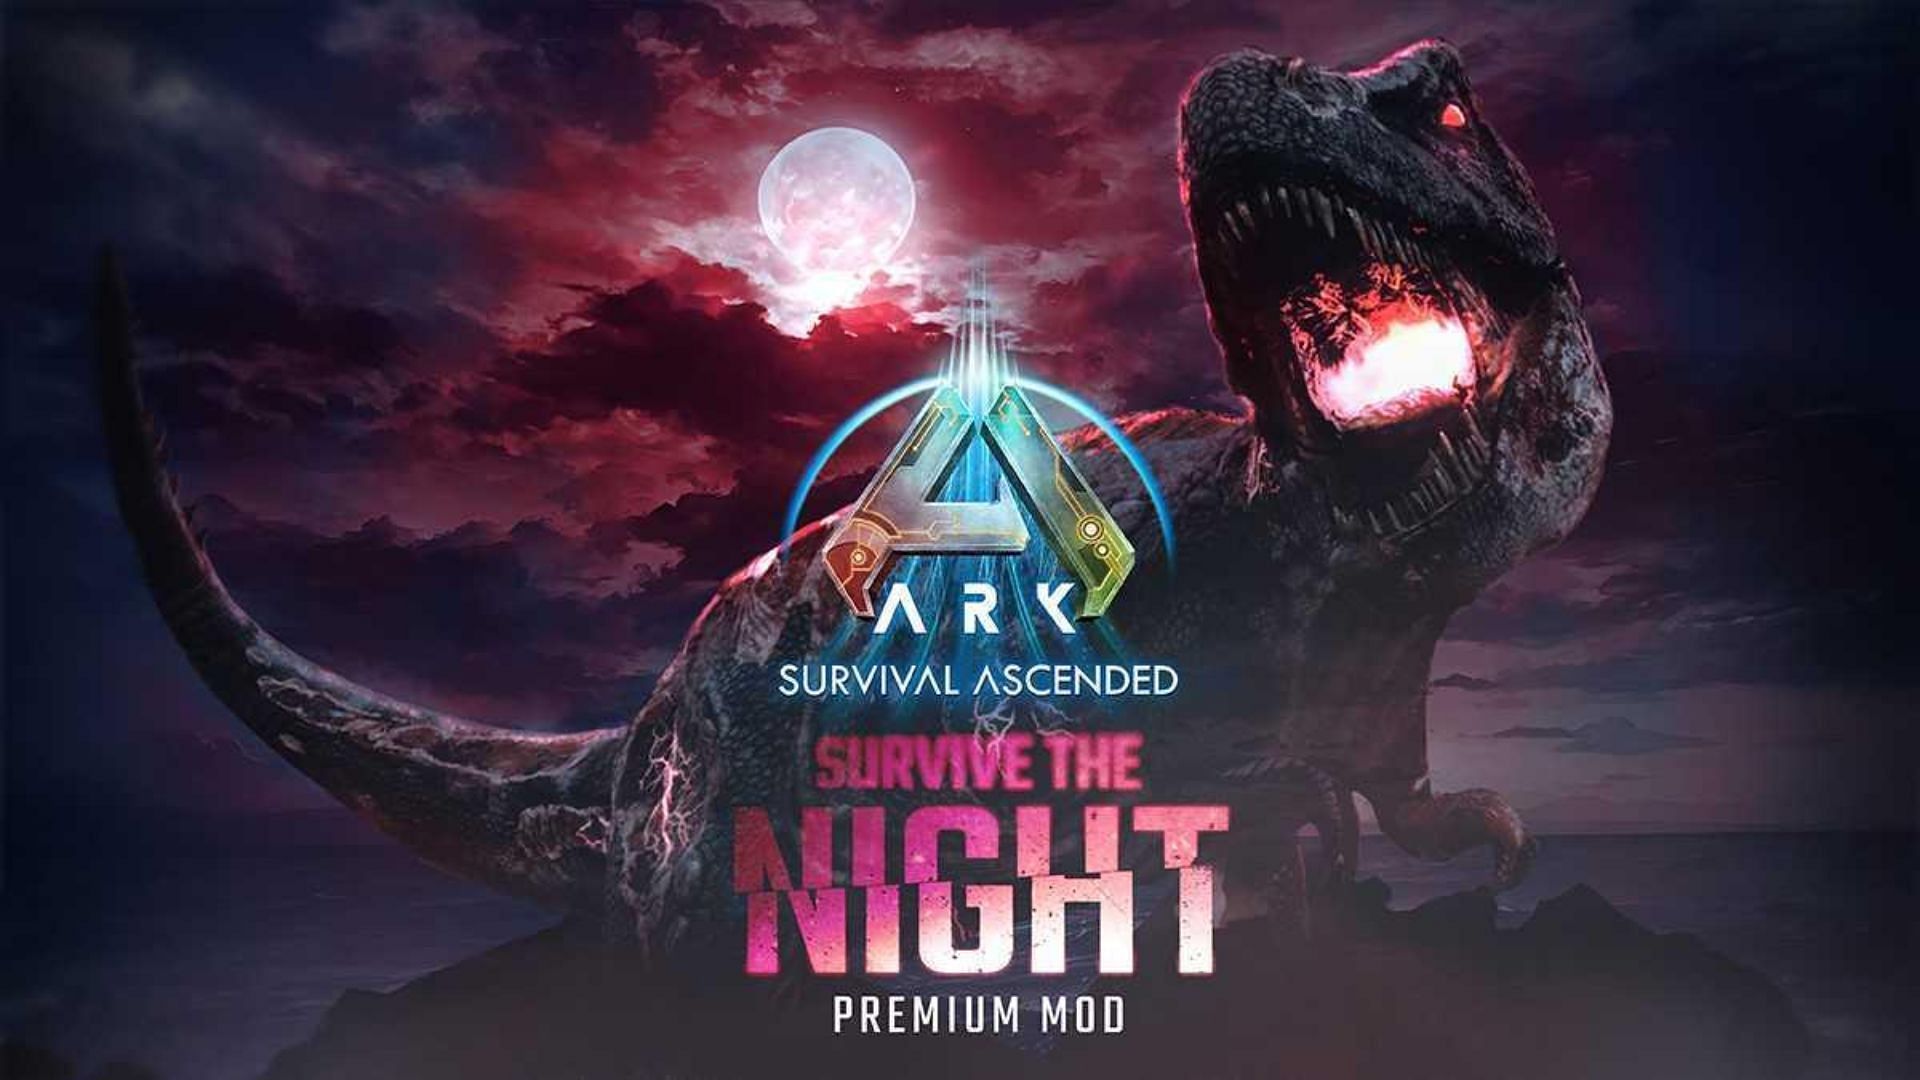 Survive the Night mod in Ark Survival Ascended